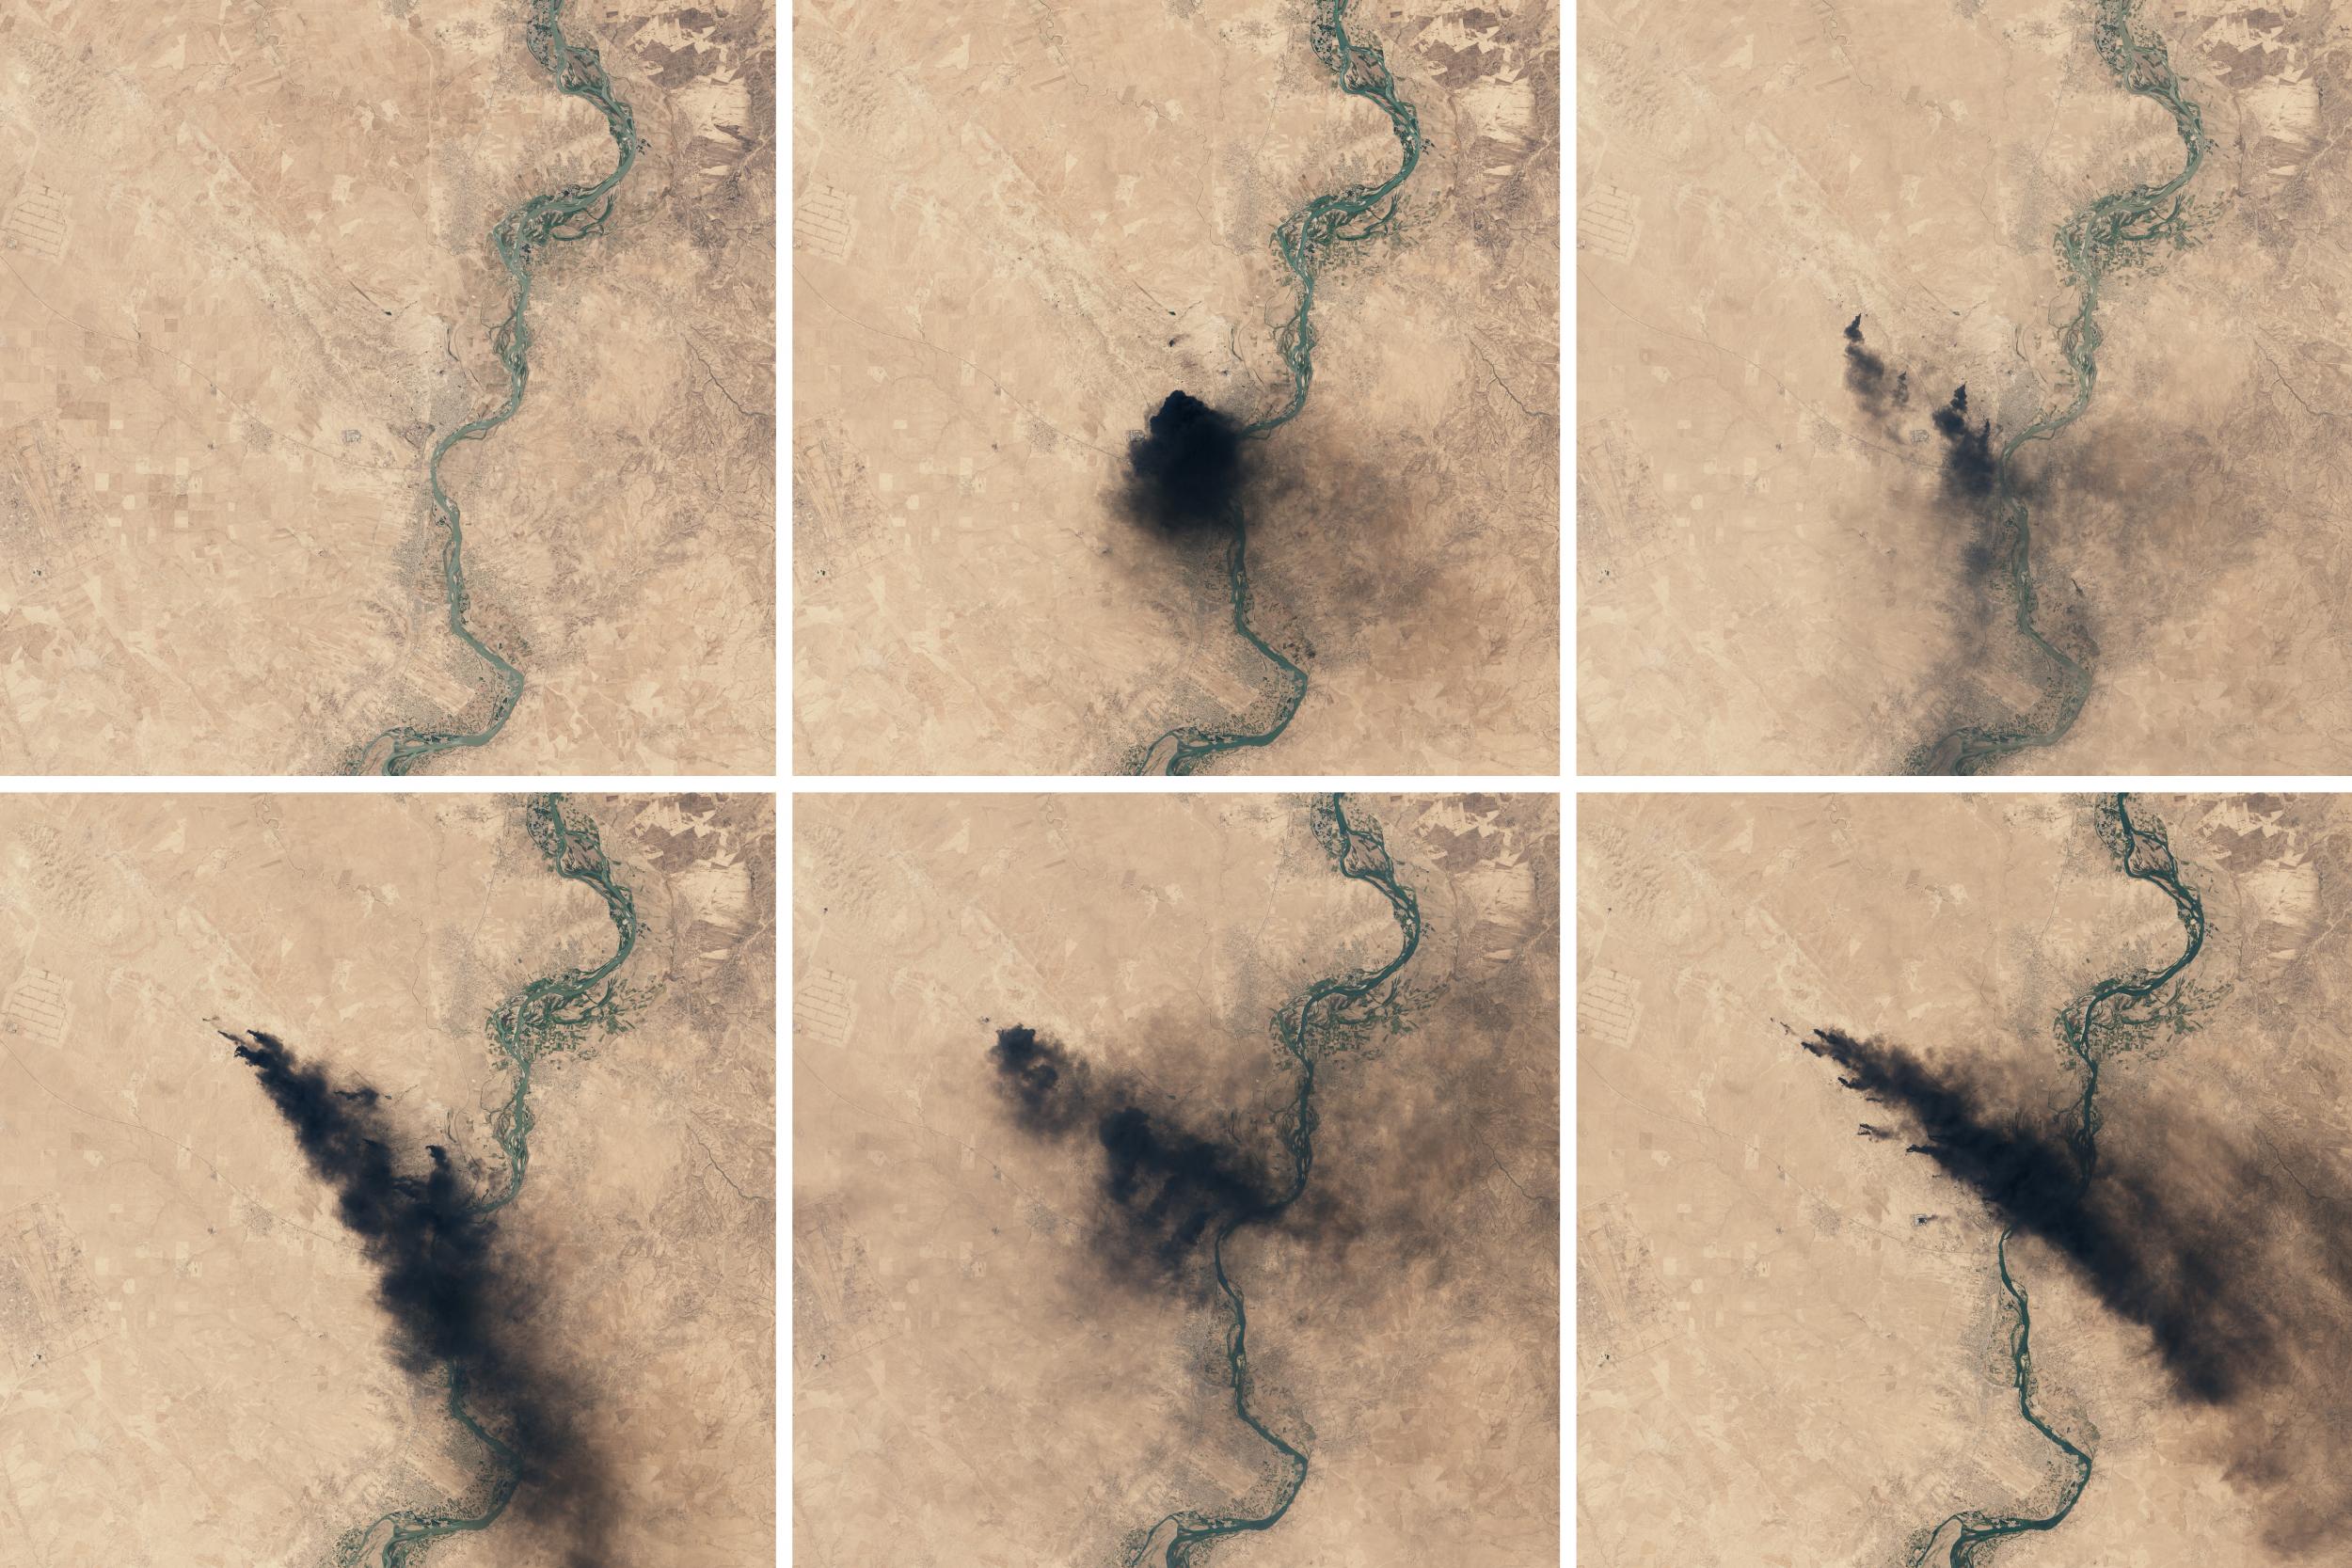 Images from Nasa’s Operational Land Imager on Landsat 8 show dense smoke plumes from burning oil fields south of Mosul (Nasa)